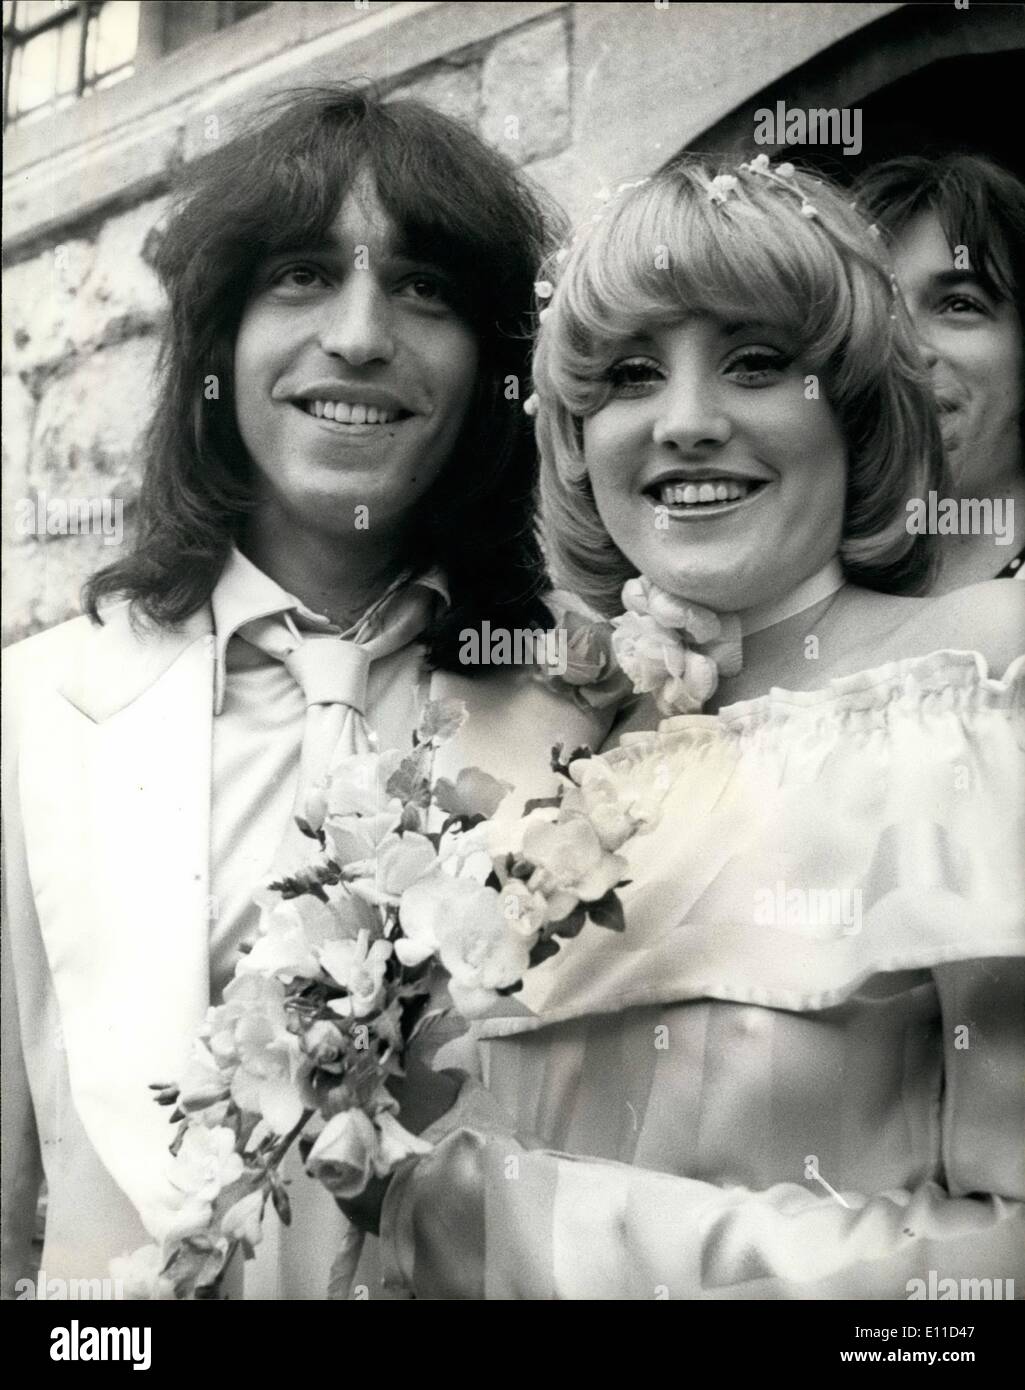 Feb. 02, 1977 - Lorna Luft Weds: Singer Lorna Luft the 23-year old daughter of late Judy Gerald, was married this afternoon to pop guitarist Jake ''The Rake'' Hooker at the All Hallows-by-the Tower, ion the City. Photo Shows The happy couple after the service today. Stock Photo